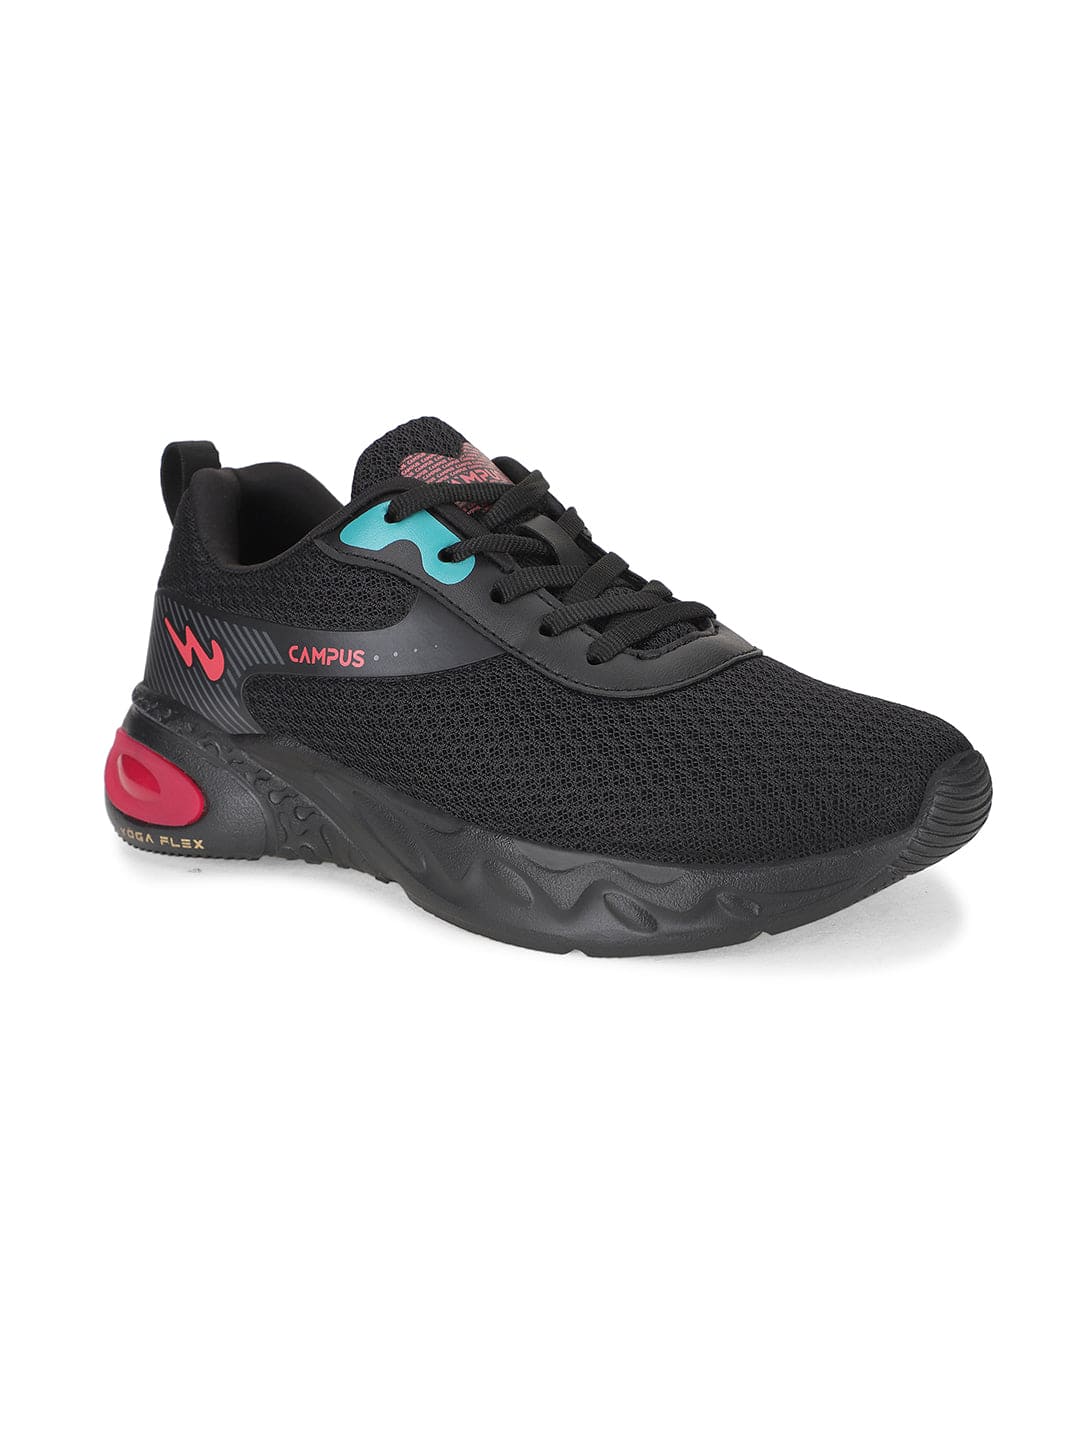 Skechers Sneakers - Flicker Flash - 303700L-LBMT - Online shop for sneakers,  shoes and boots